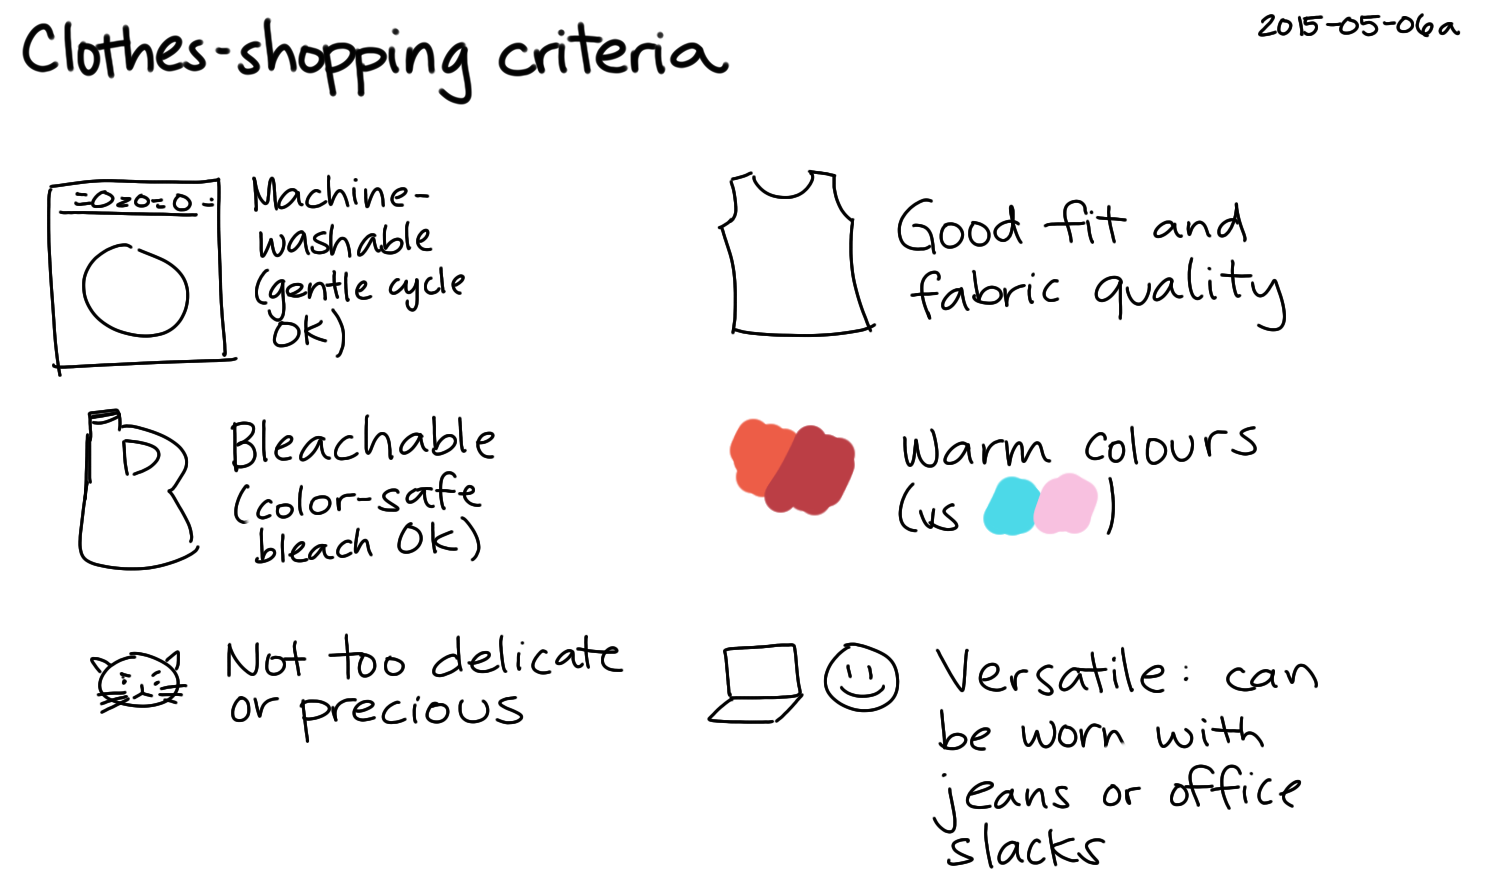 2015-05-06a Clothes-shopping criteria -- index card #shopping.png